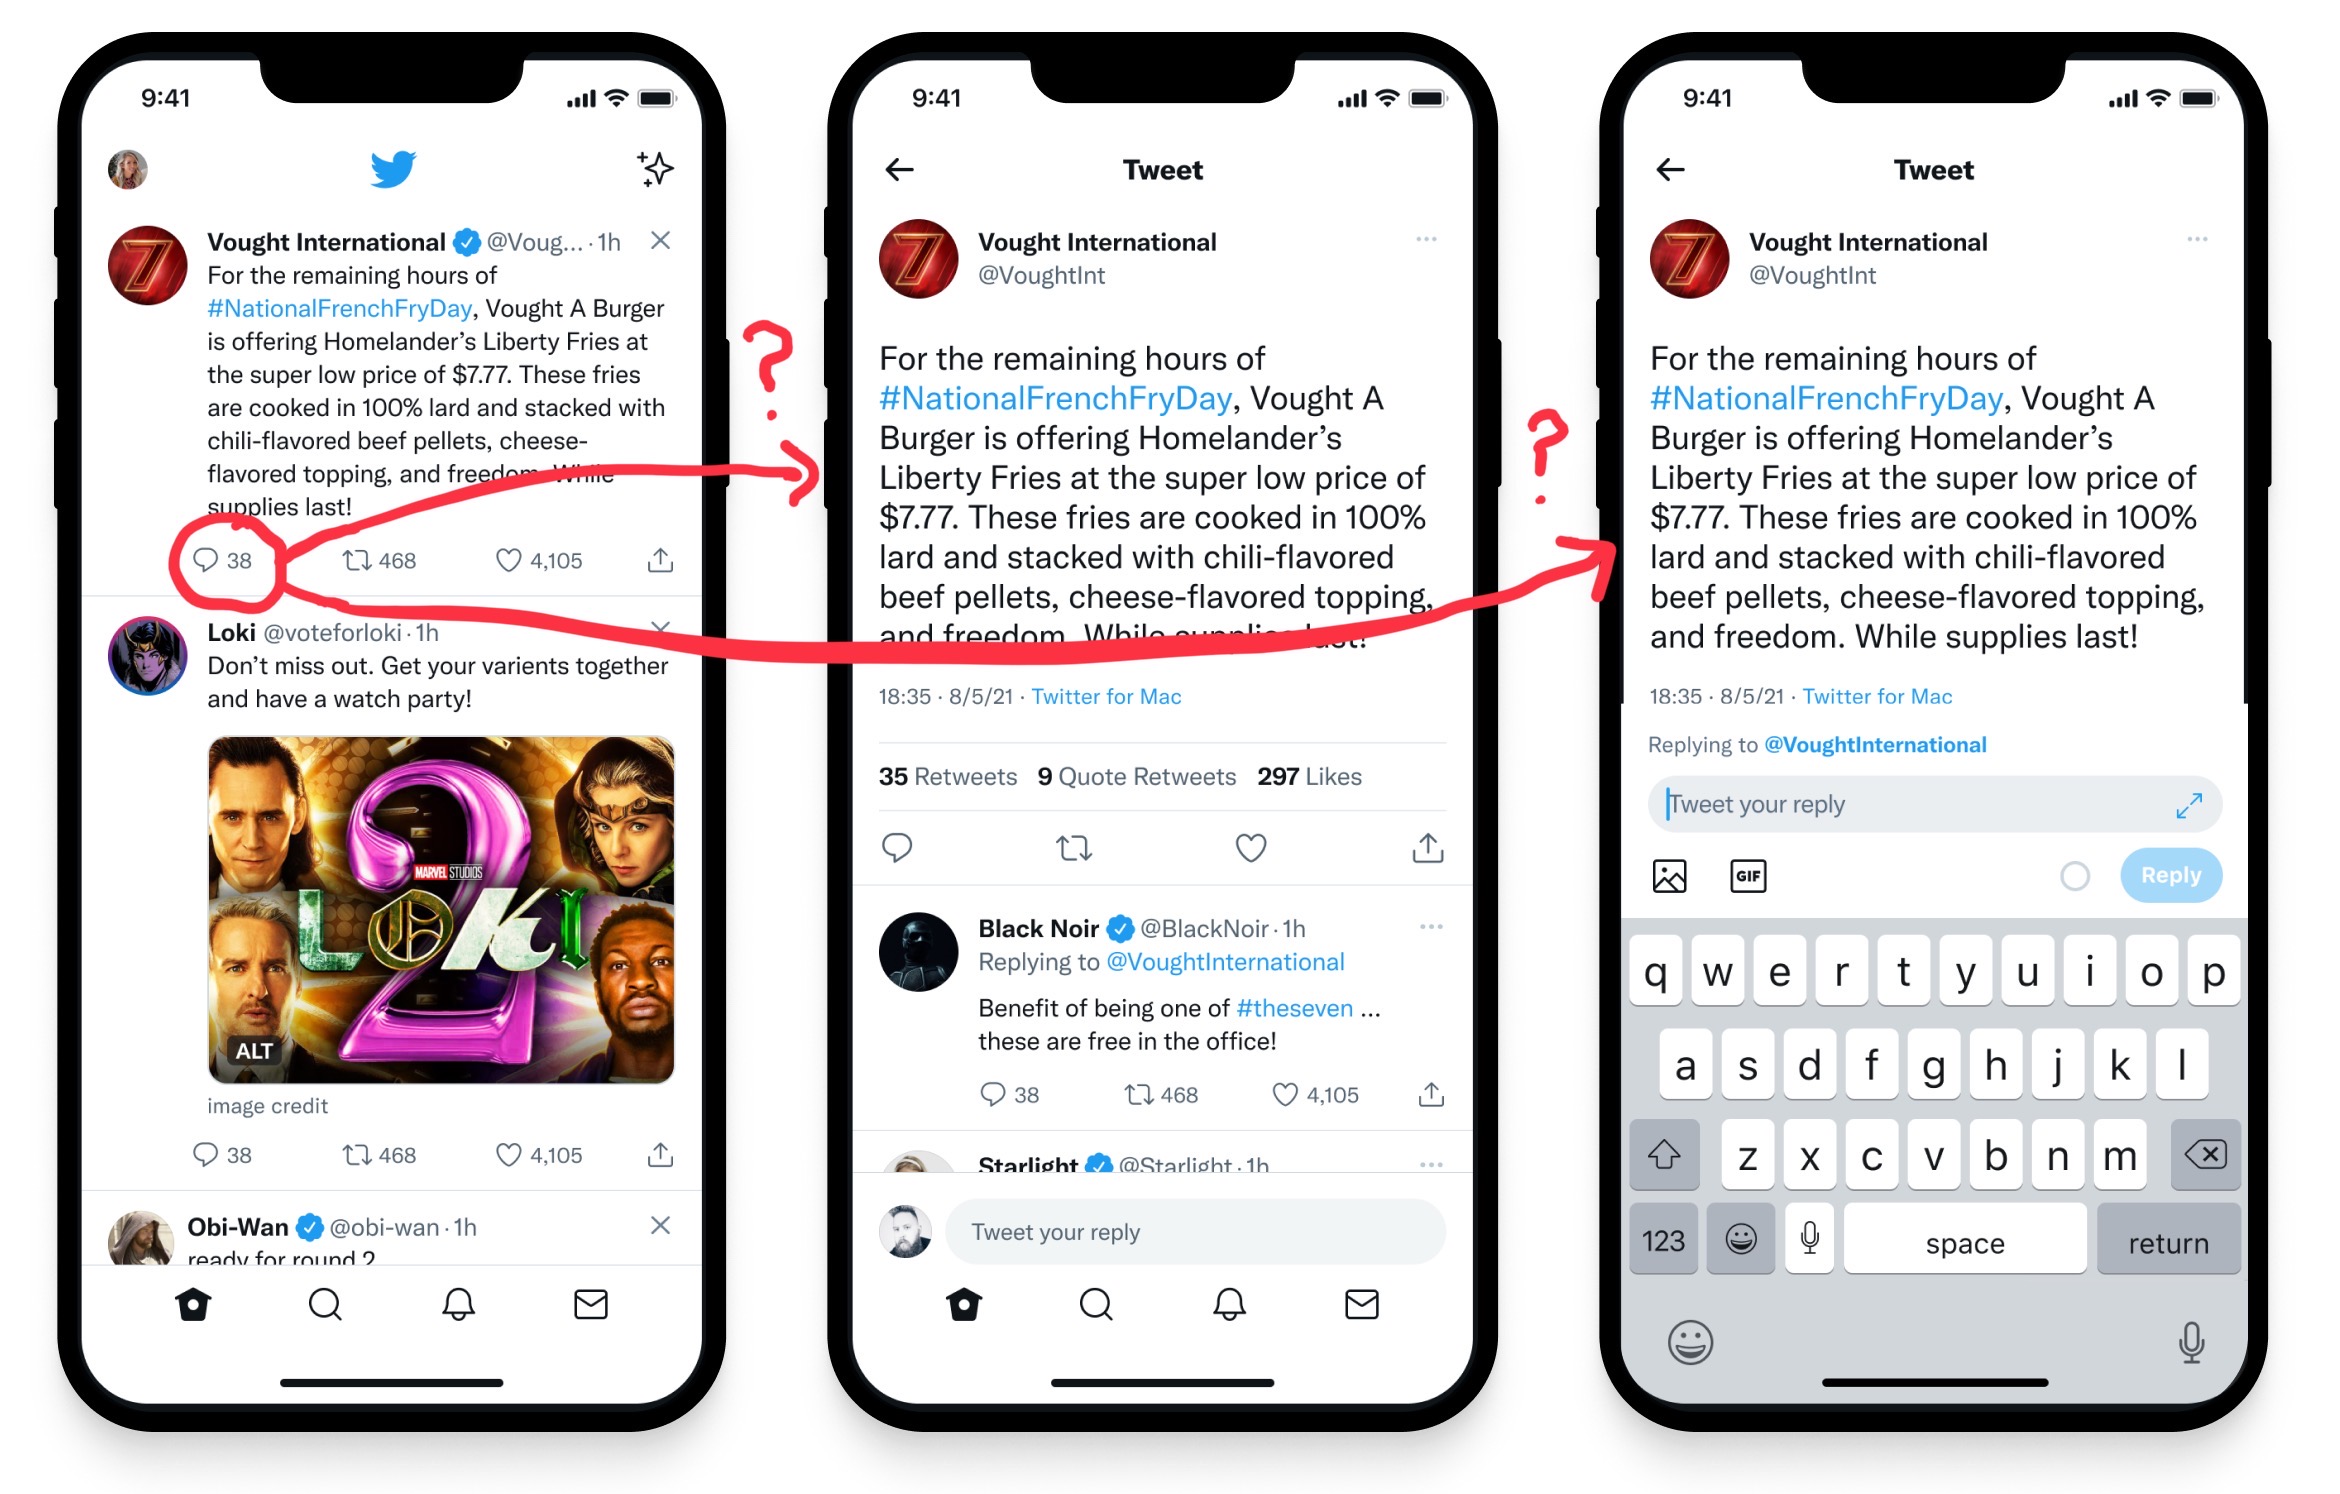 twitter app for iOS with showing the twitter home timeline and tweet details